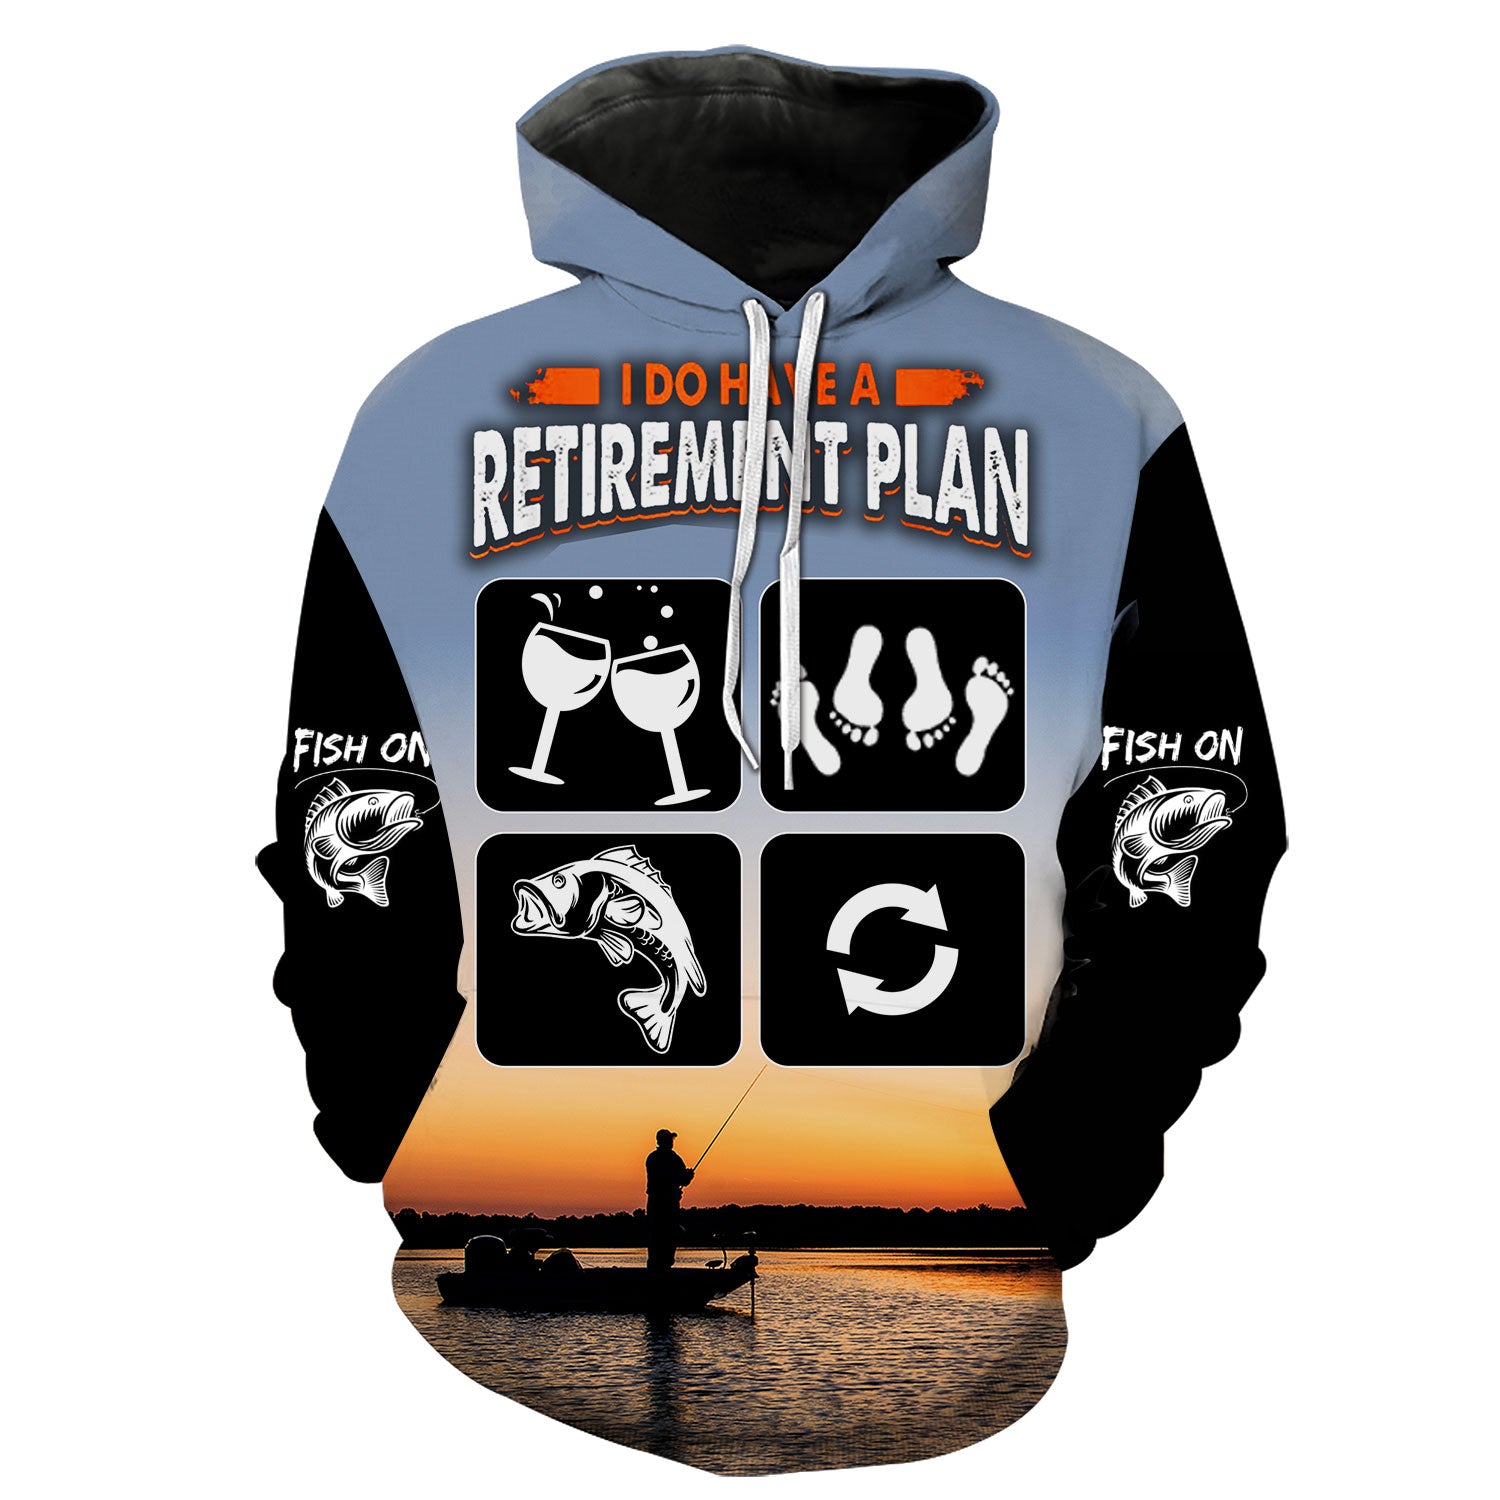 I do have a Retirement Plan - Fishing Hoodie